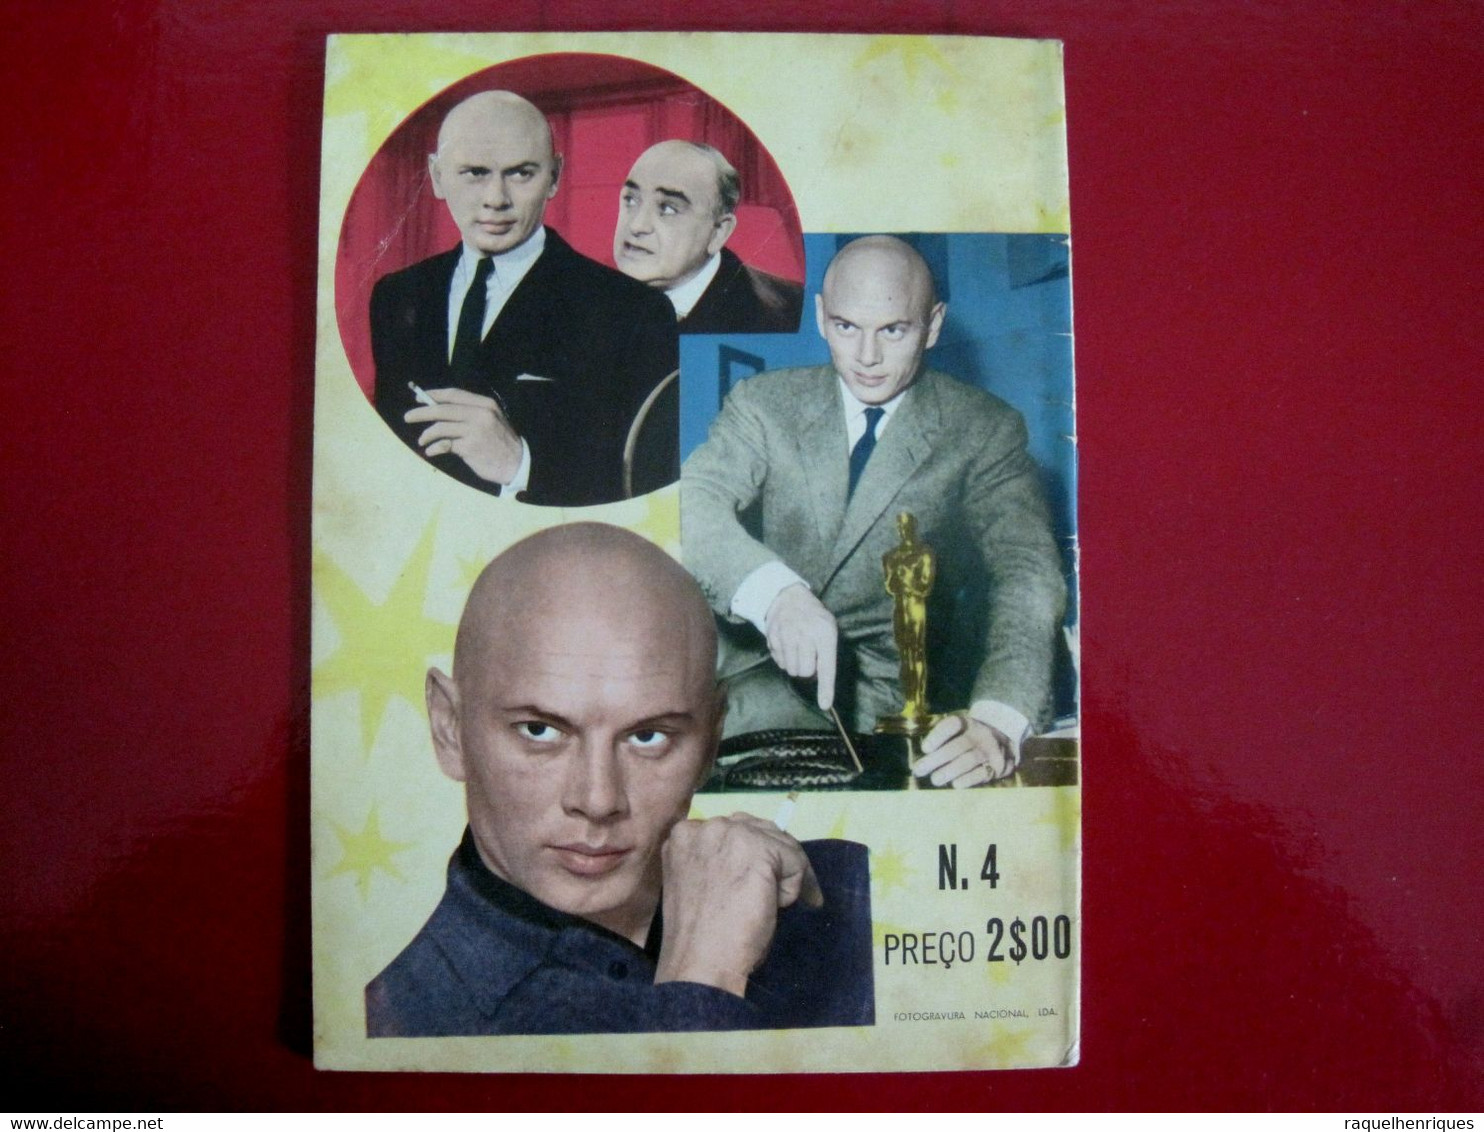 MOVIE STAR STORY AND PHOTOS - YUL BRYNNER - PORTUGAL MAGAZINE - ALBUM DOS ARTISTAS Nº 4 - Revues & Journaux